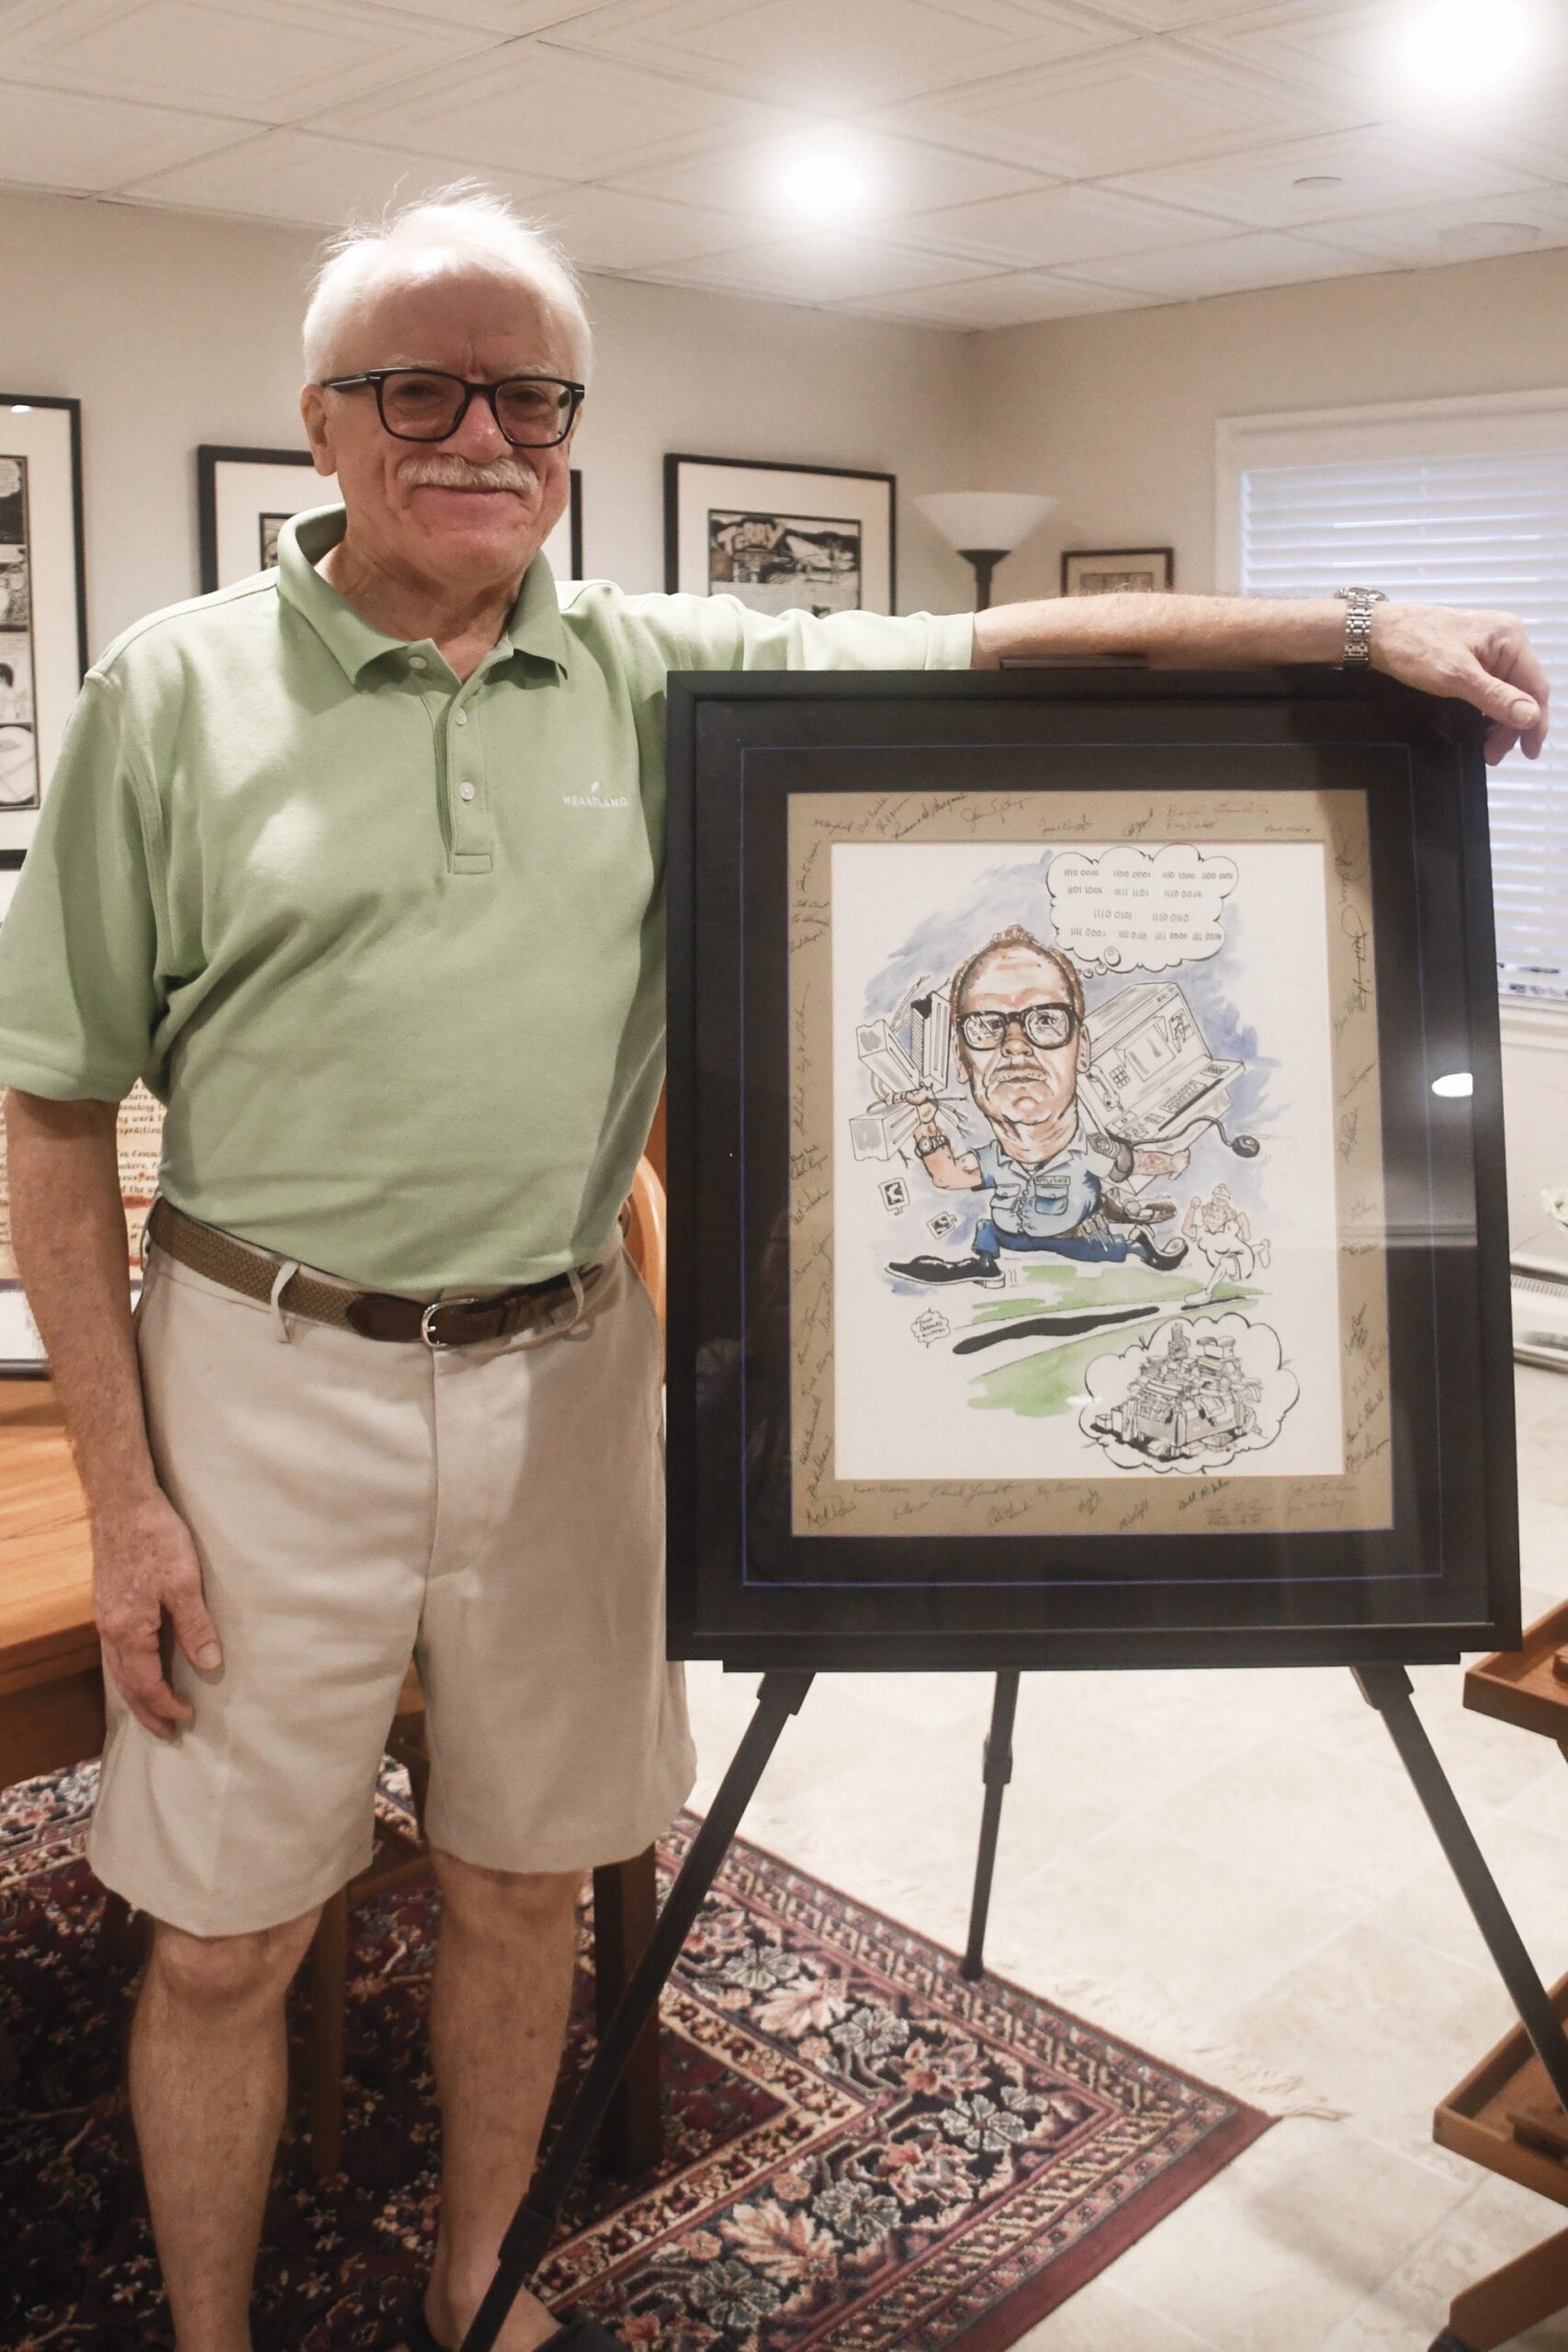 David Applegate is pictured here with a caricature drawing, depicting his dad’s work as a Cold War spy. (Photo by Christine Such/My Sun Day News)